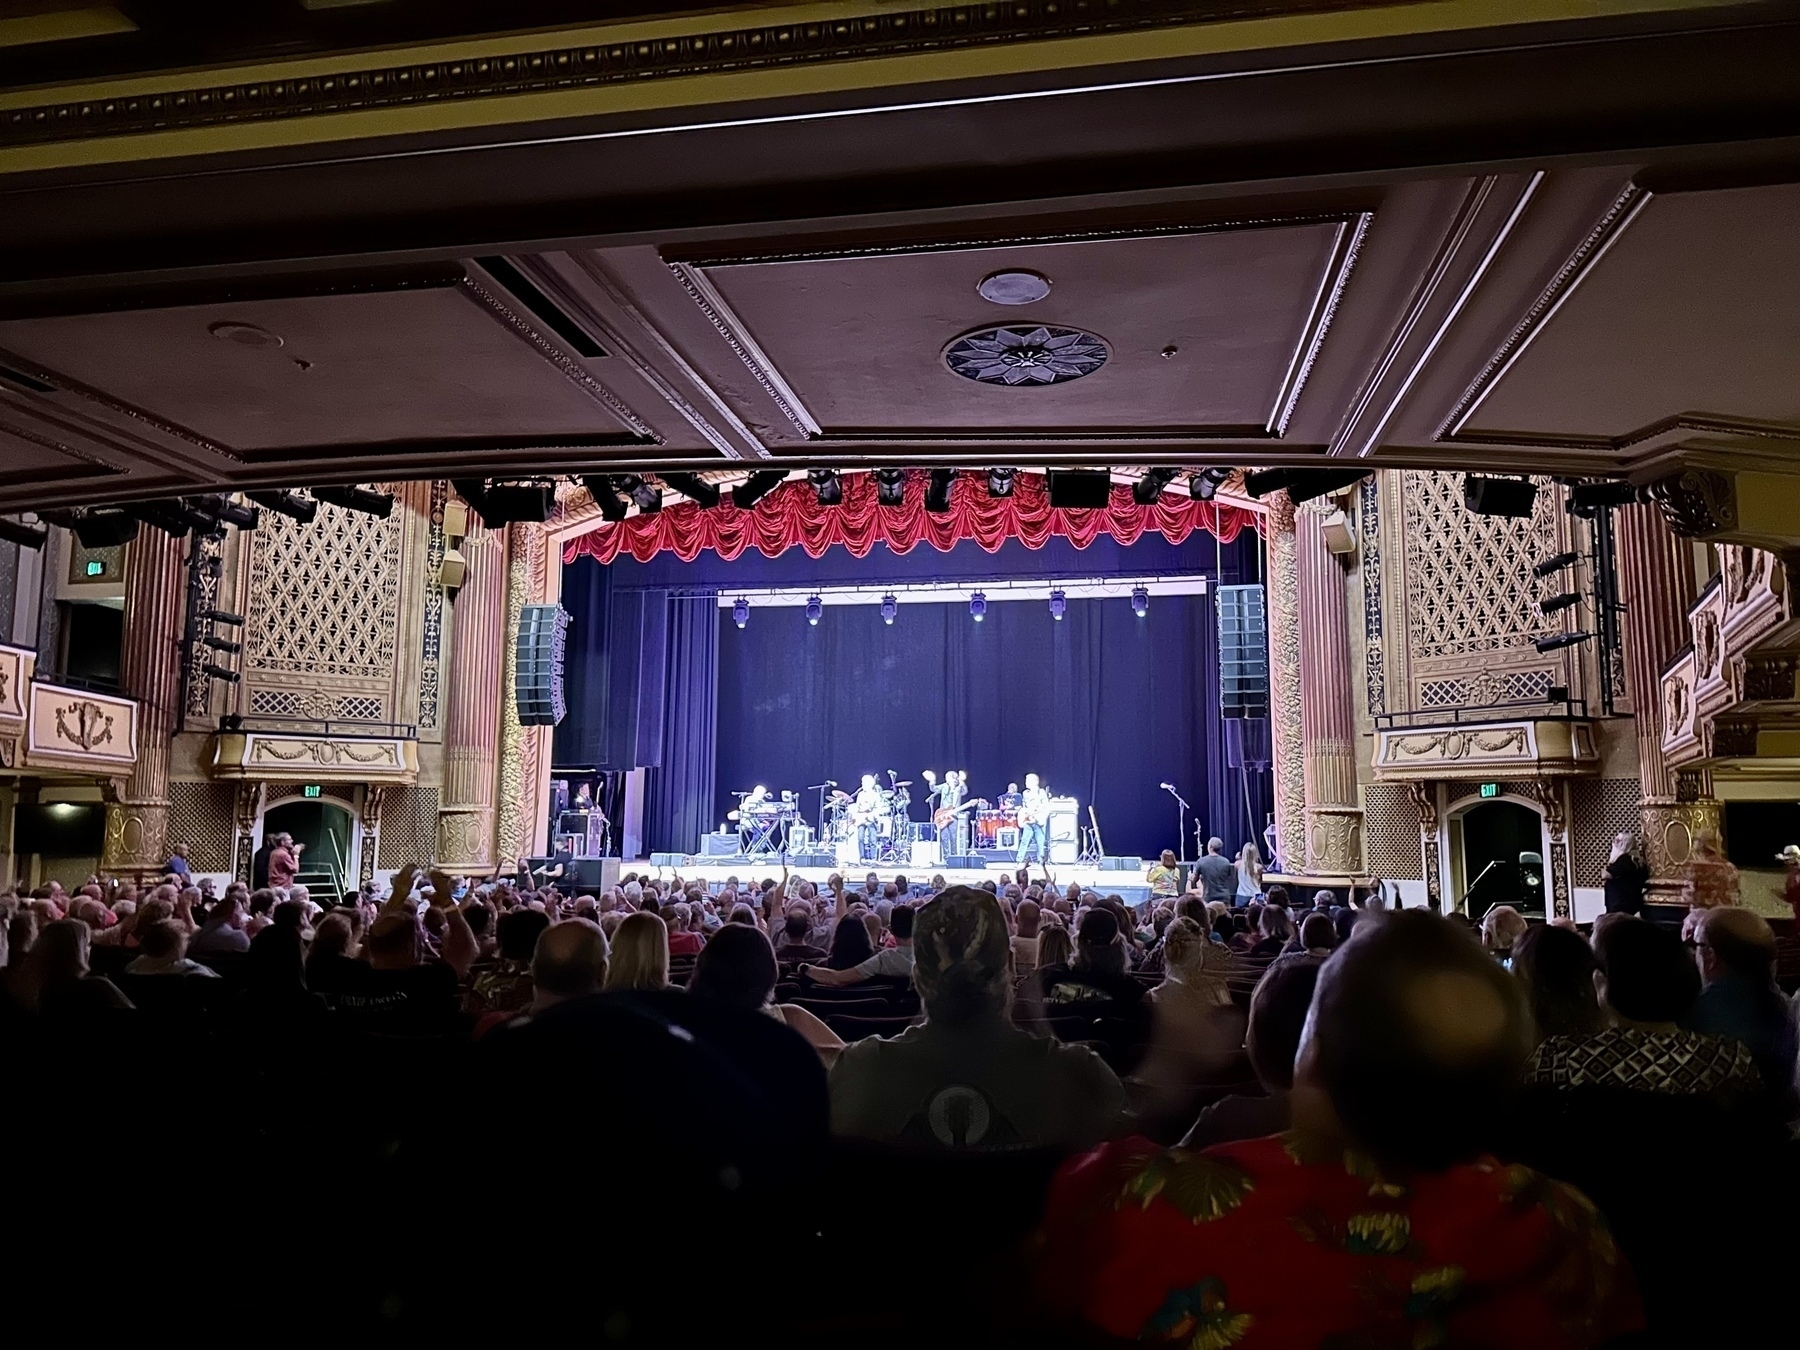 The image shows an indoor theater with an audience watching a live band performance on stage, featuring ornate architectural details and red curtains.